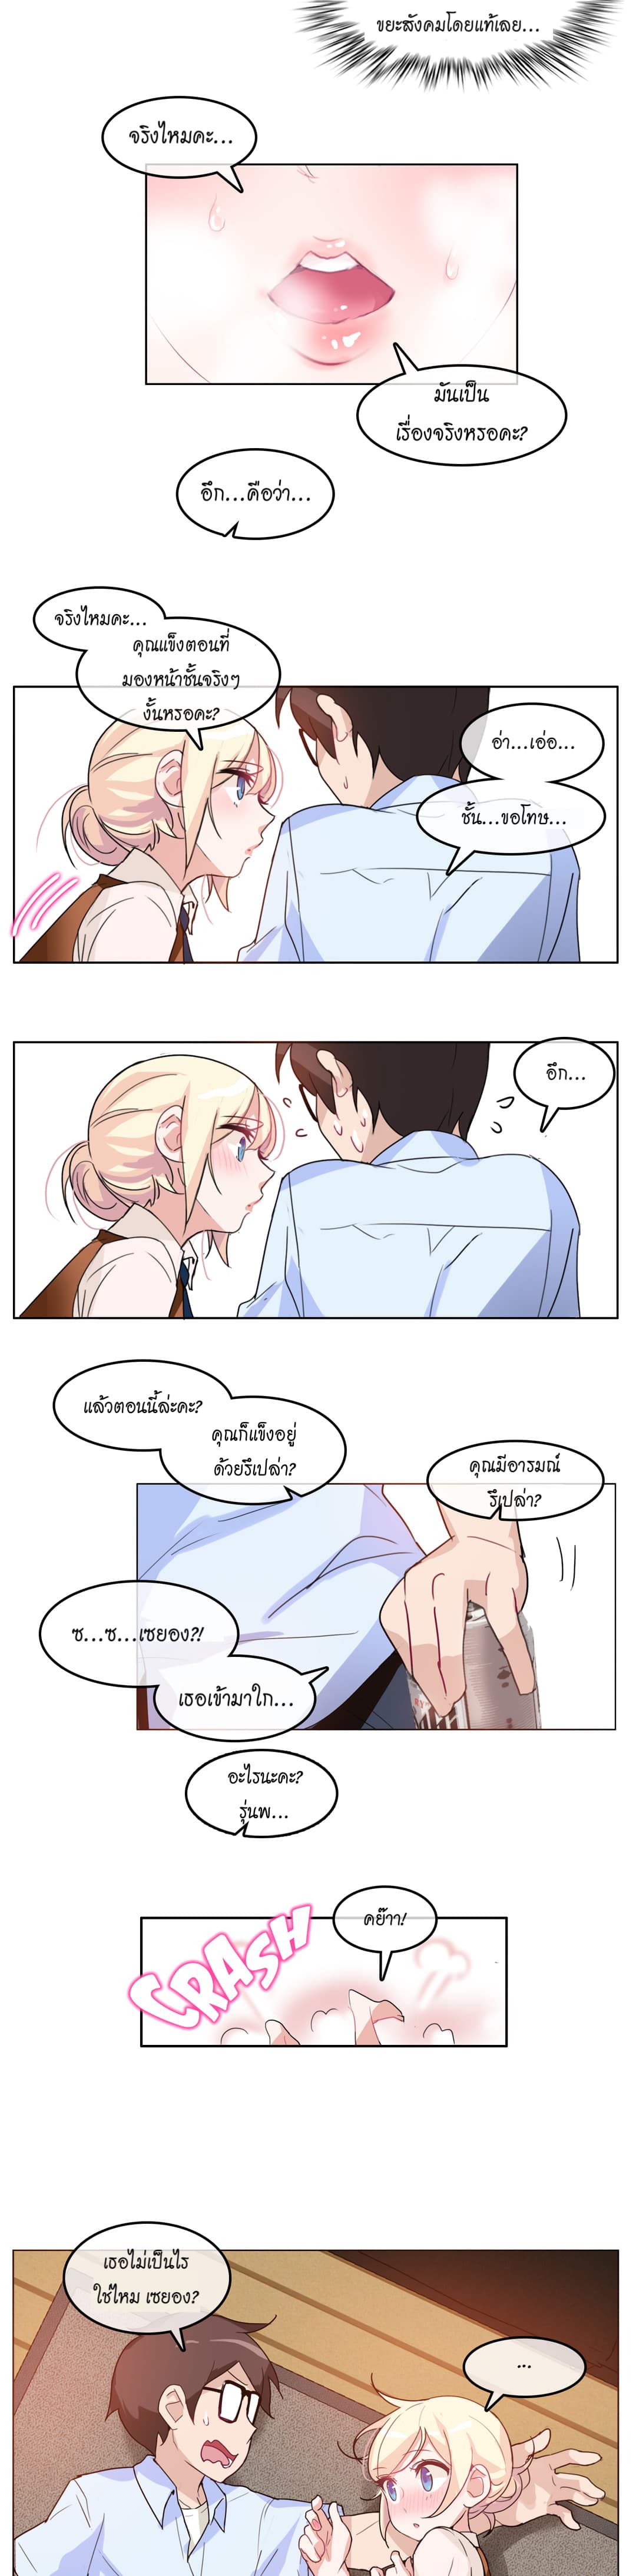 A Pervert’s Daily Life 9 (14)